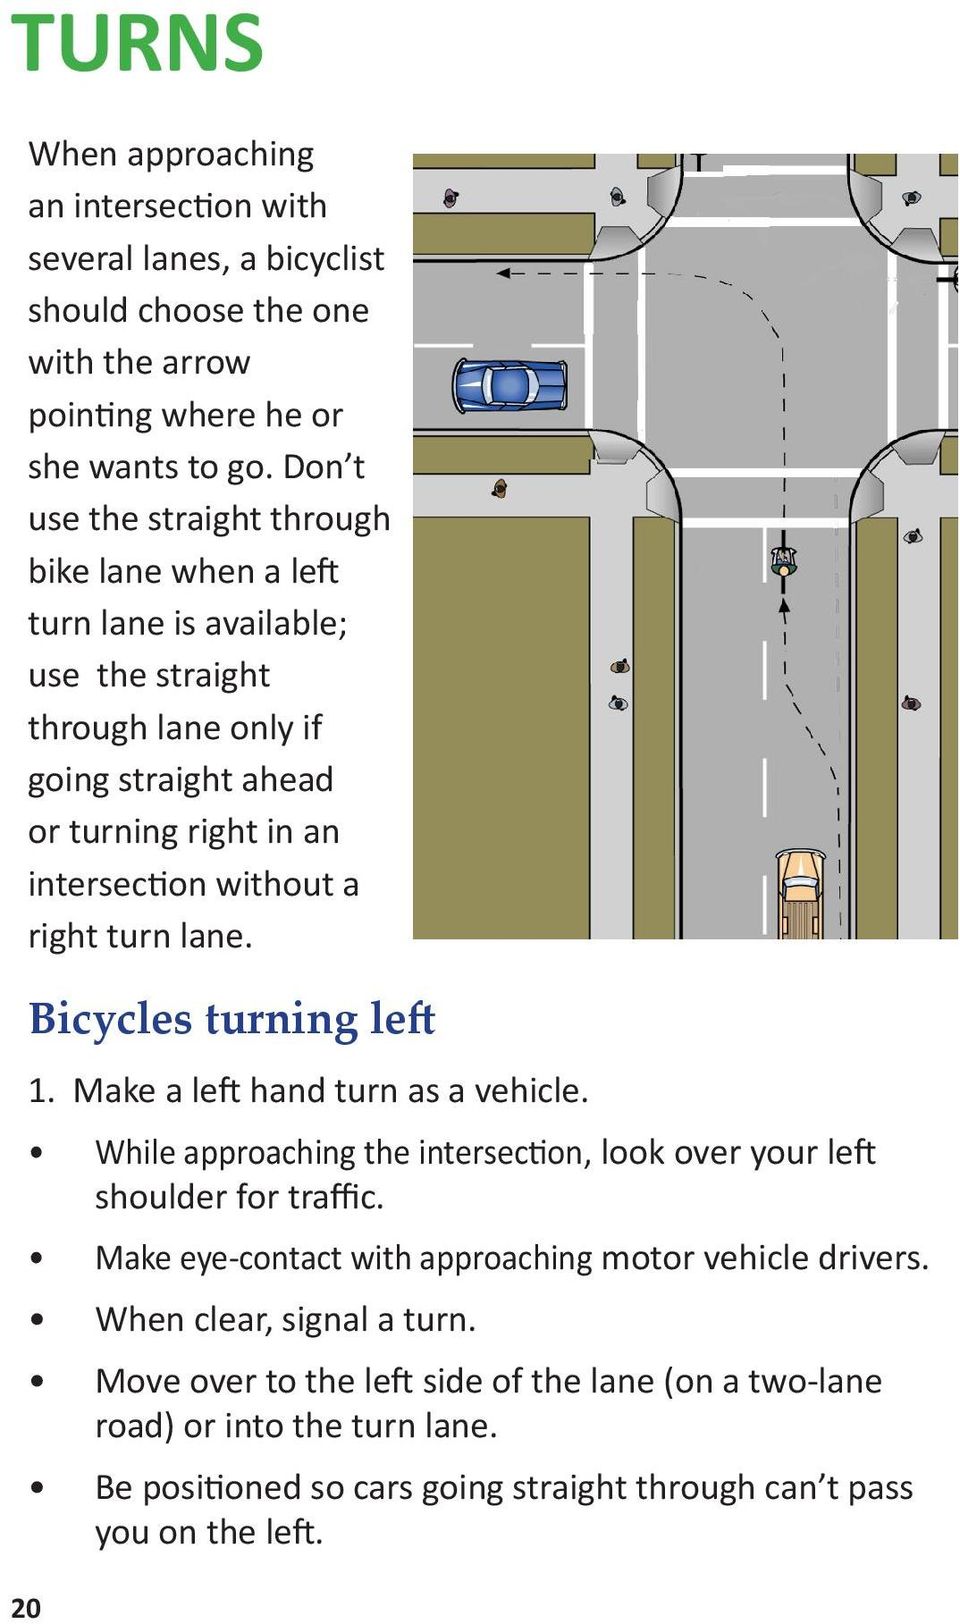 right turn lane. 20 Bicycles turning left 1. Make a left hand turn as a vehicle. While approaching the intersection, look over your left shoulder for traffic.